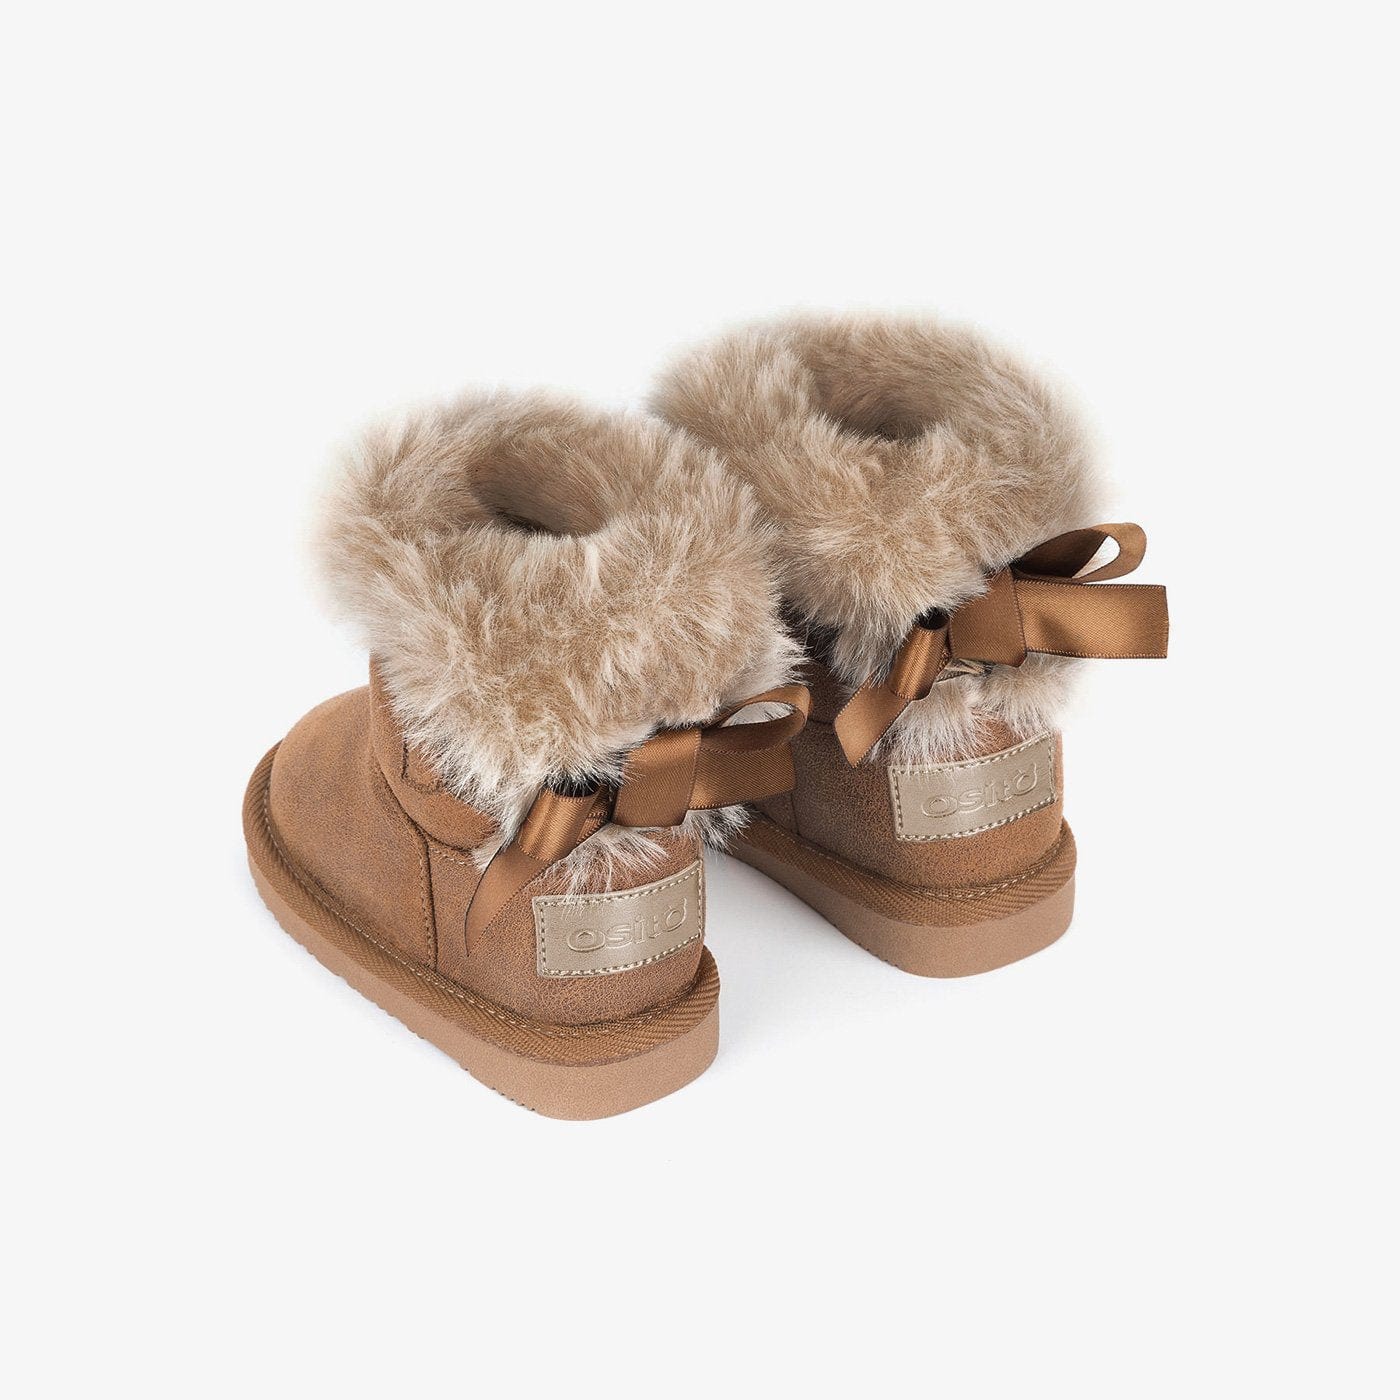 OSITO Shoes Baby's Camel Australian Boots with Bow